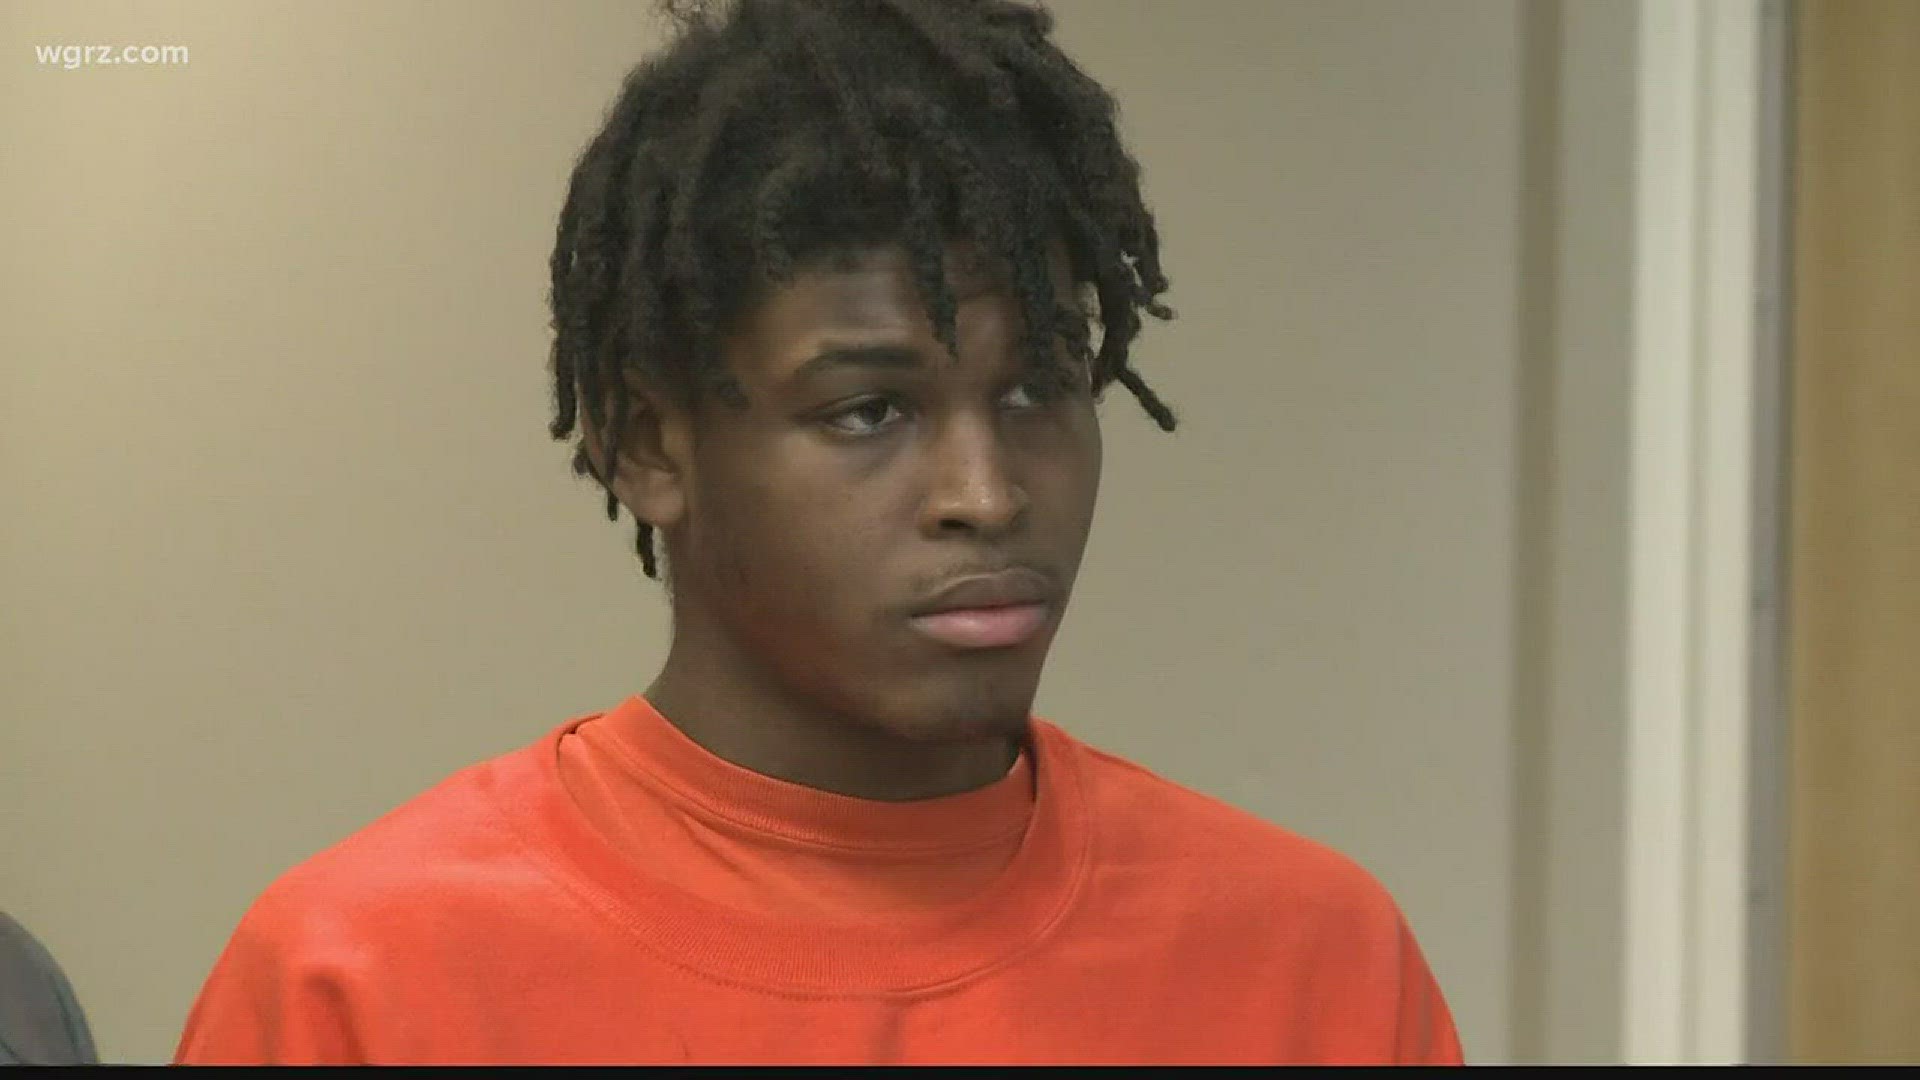 Teen Father Pleads Not Guilty To Shaken Baby